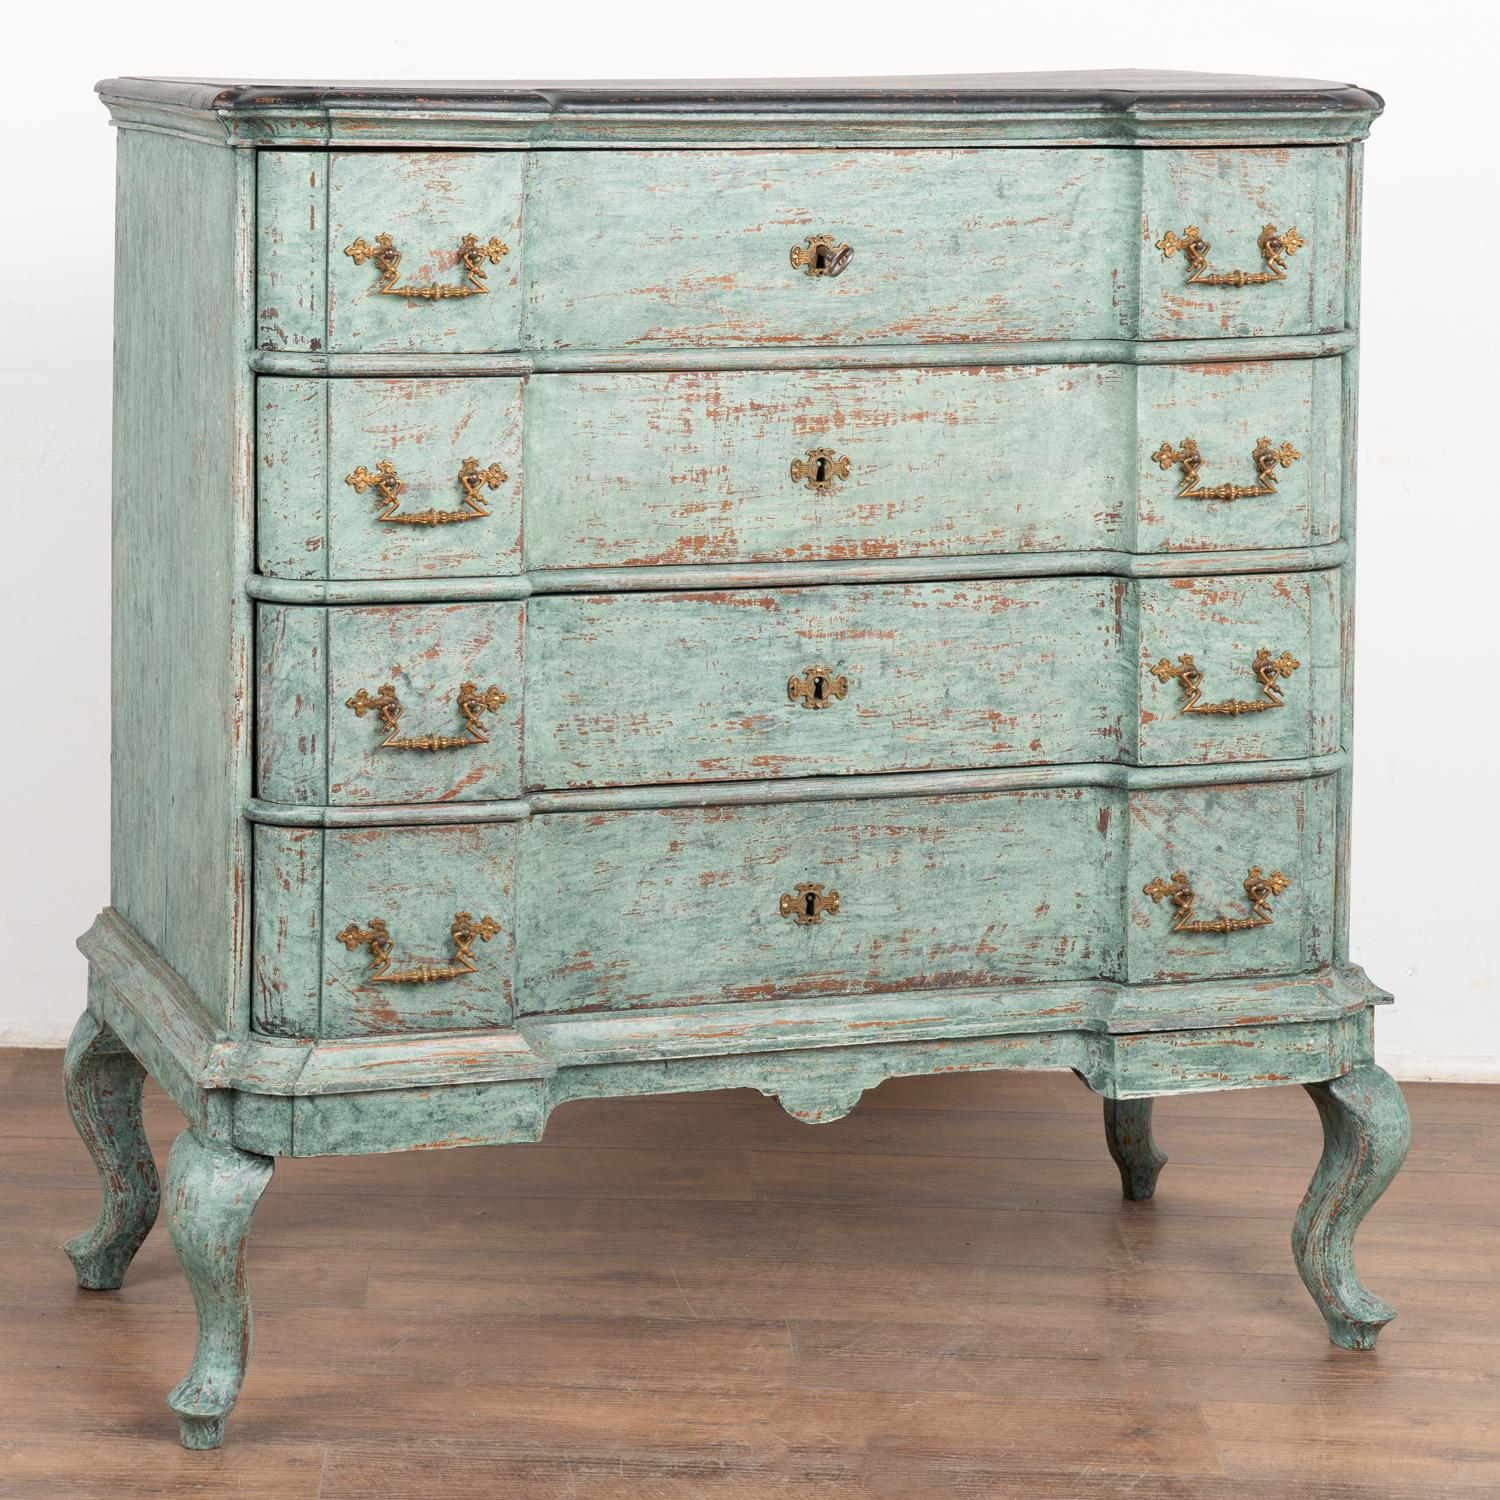 Large antique oak rococo chest of four drawers with handsome brass hardware pulls all resting on cabriolet feet.
This commode has been given an exceptional new professional blue/green seafoam layered painted finish and has been lightly distressed,